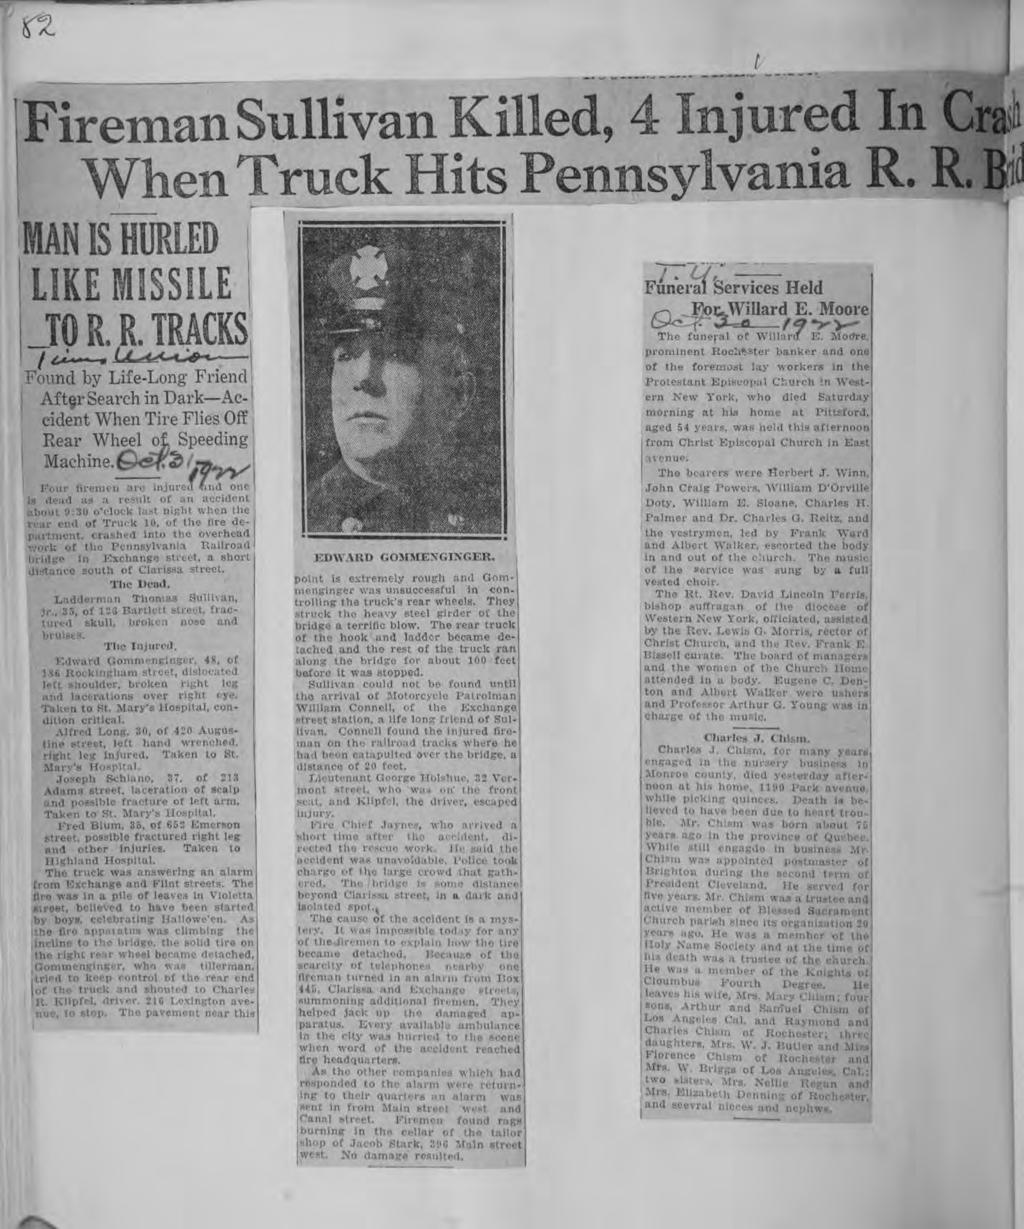 - (S a- Central Lbrary of Rochester and Monroe County Hstorc Scrapbooks Collecton Freman Sullvan MAN S HURLED LKE MSSLE 4 njured n Cras sylvana R R Bd Funeral Servces Held Moore ^>^ The funeral of